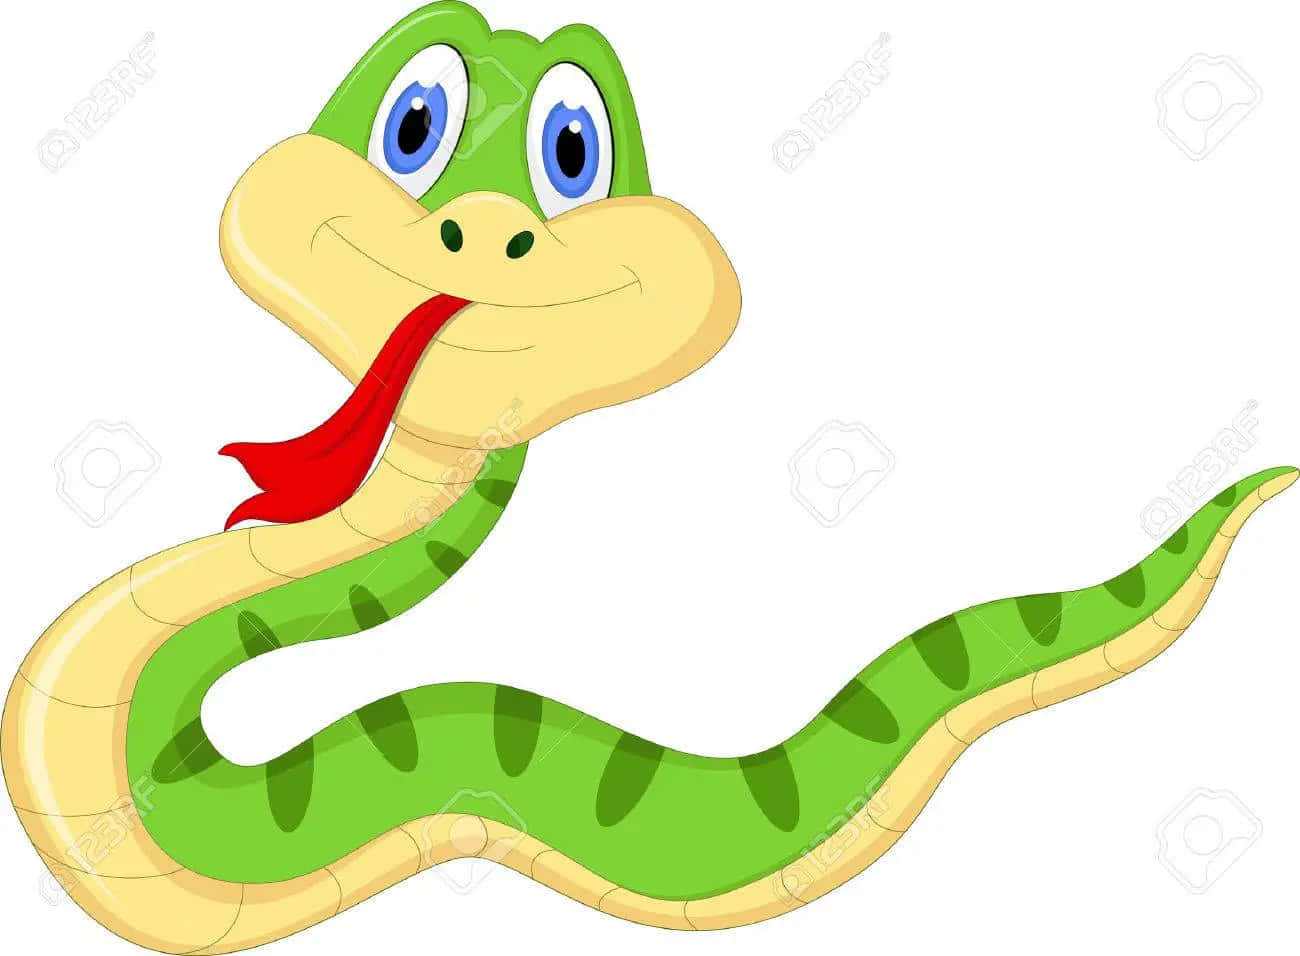 Cute Cartoon Snake With Red Tongue Picture